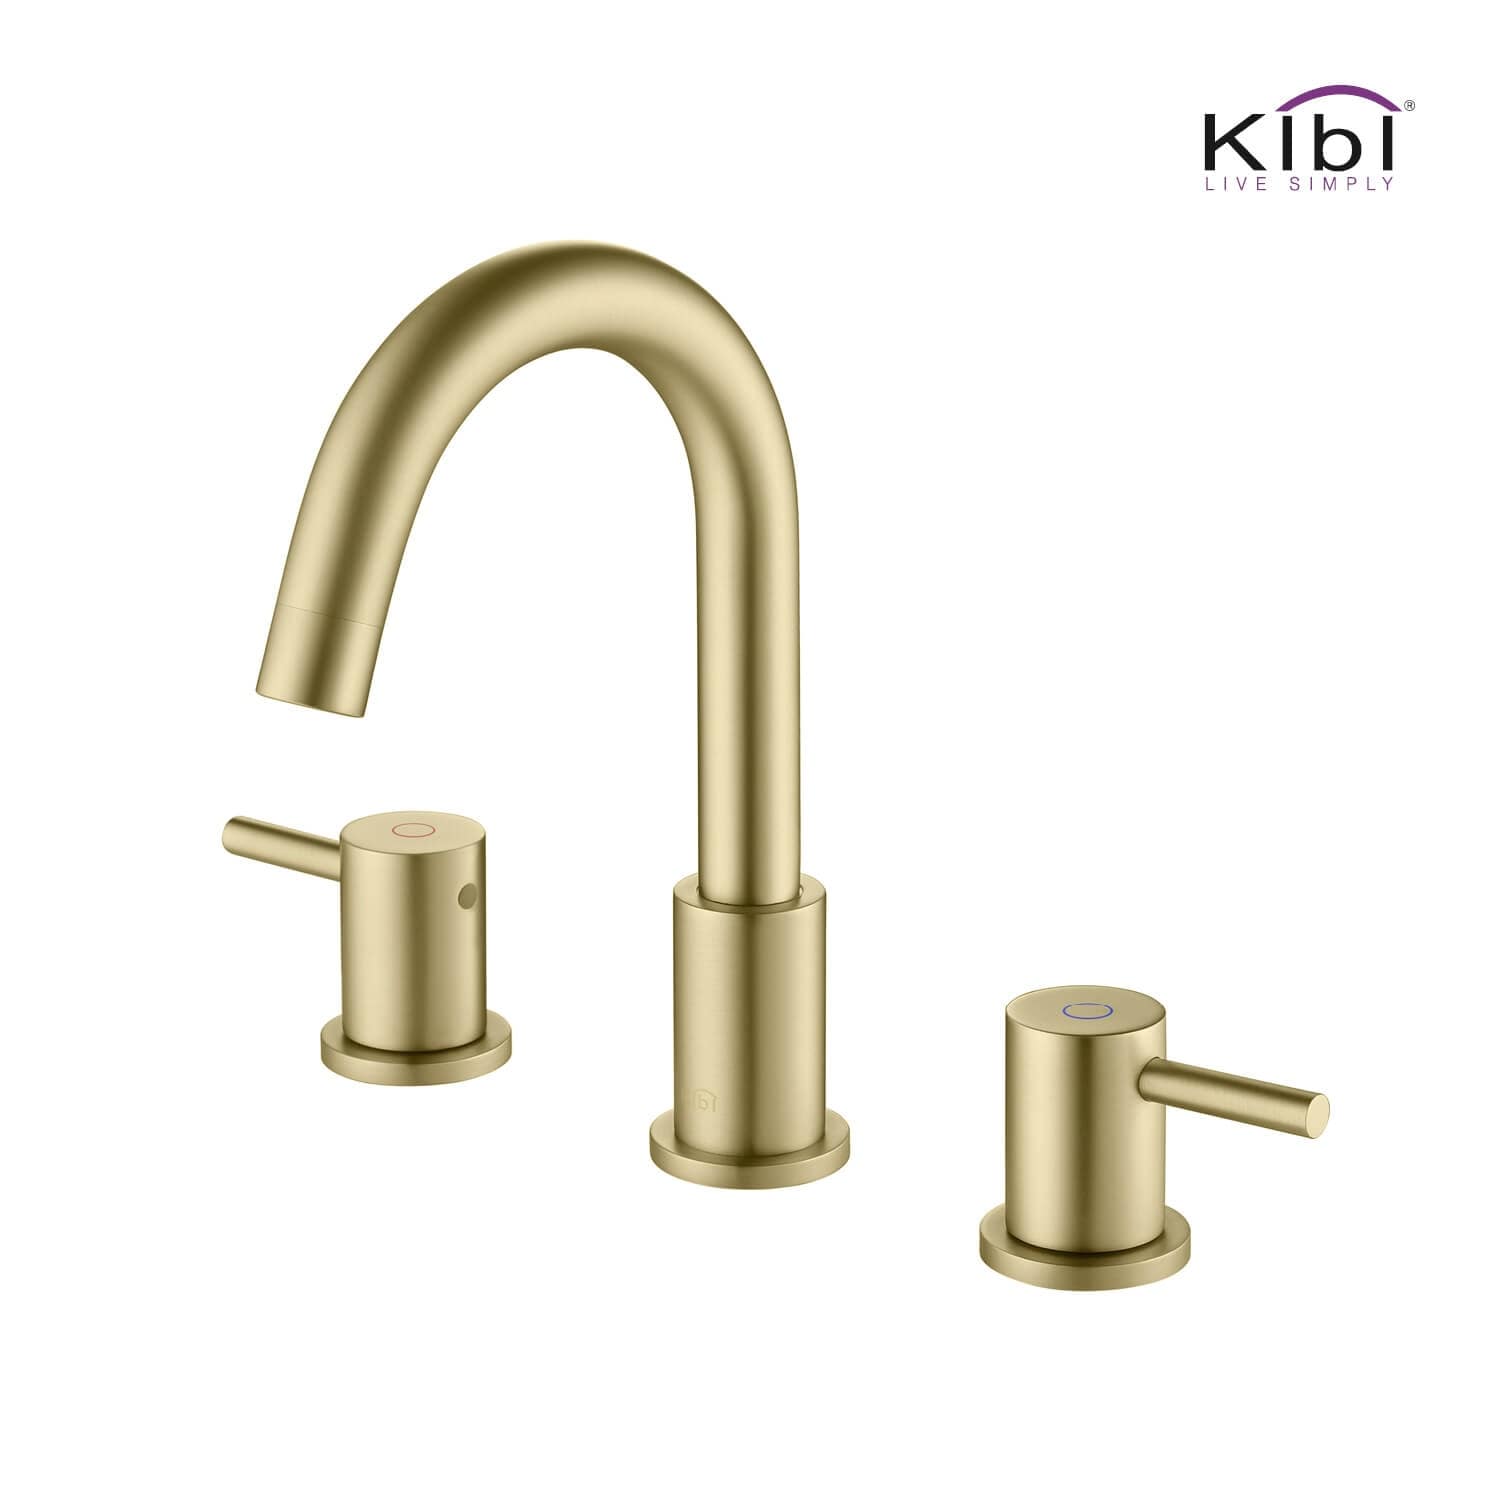 Brass Finish Bathroom Sink Faucets - Bed Bath & Beyond